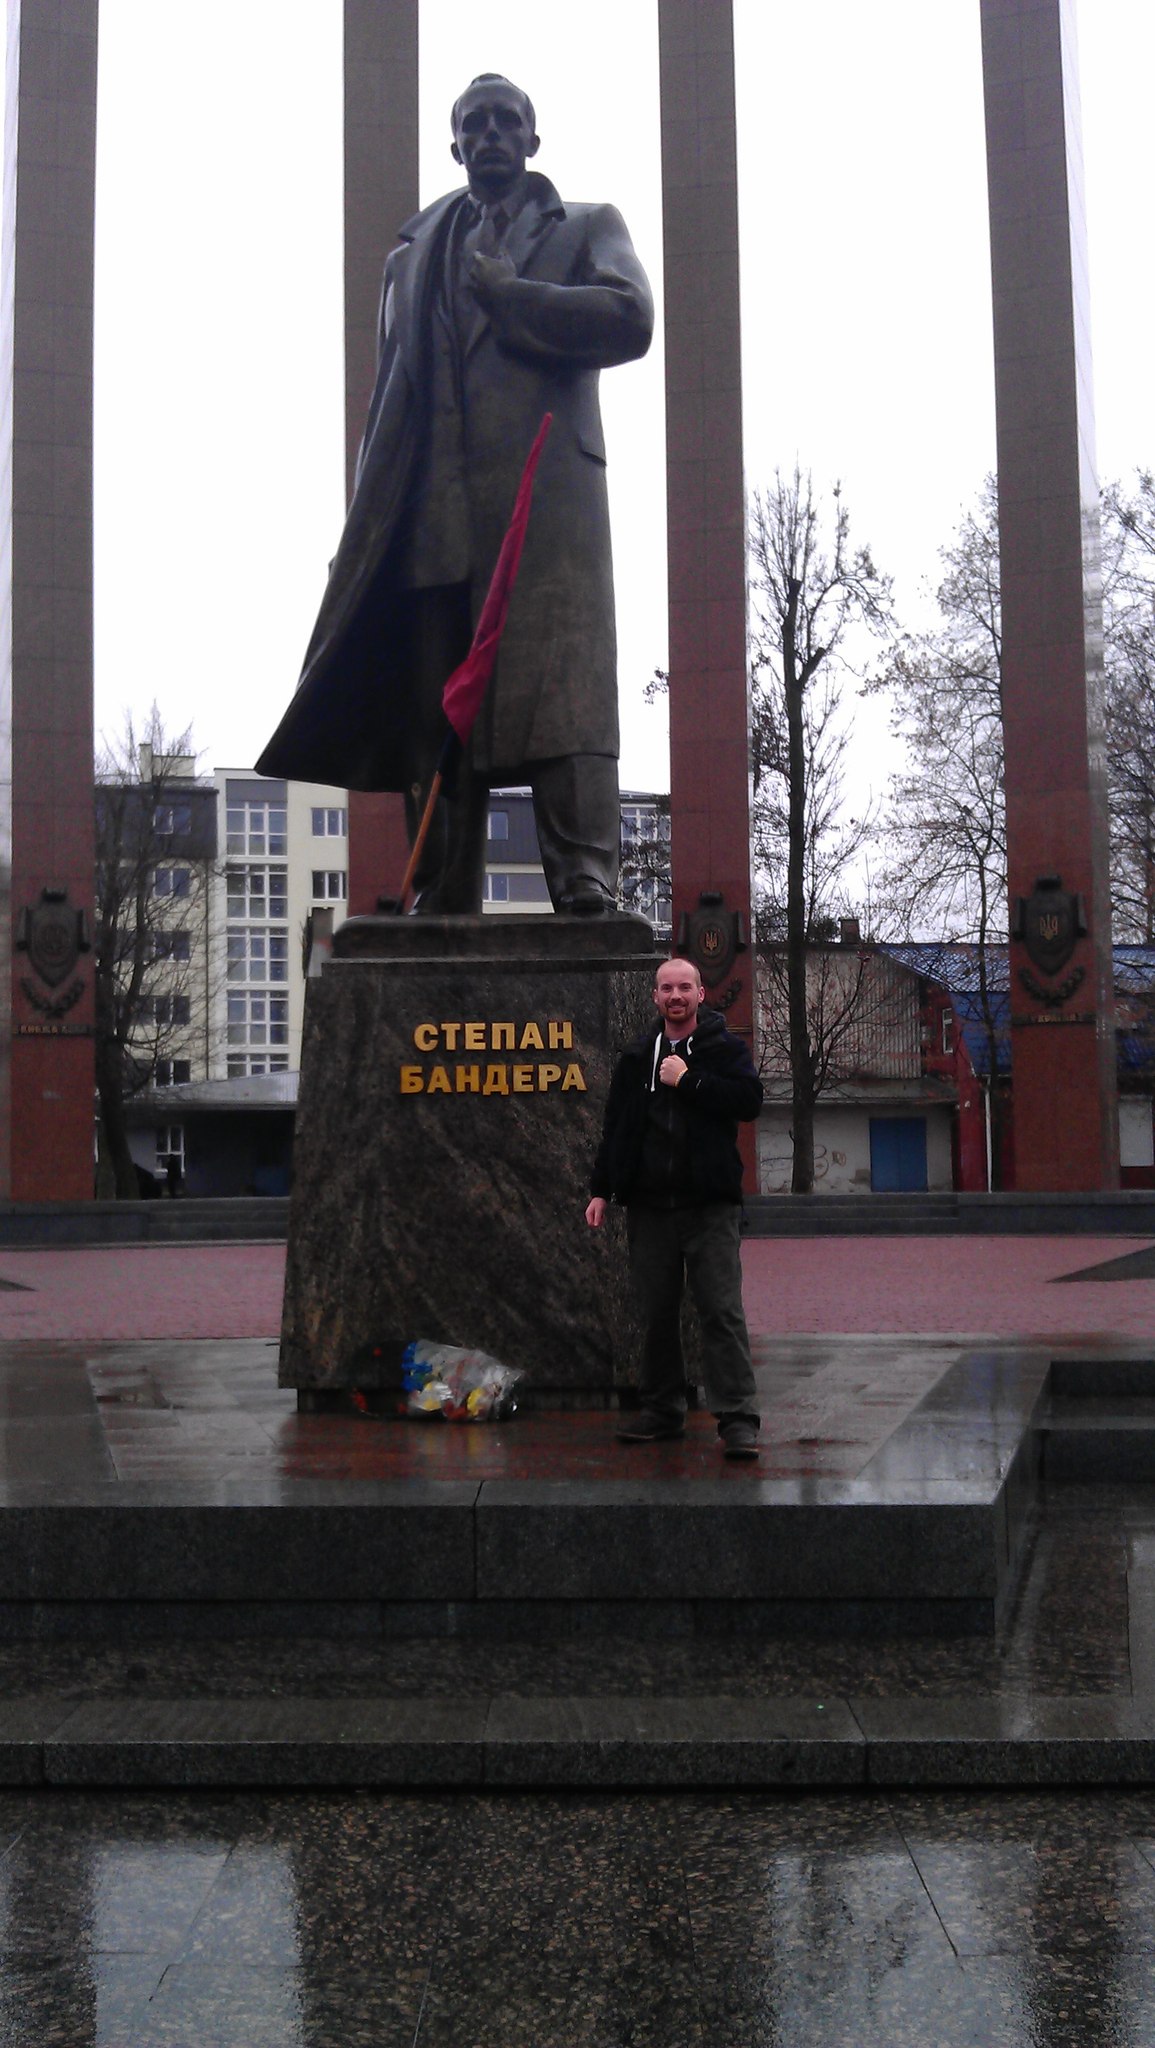 Frank Bagley under a Stepan Bandera statue. Bandera was an antisemite, fascist, and war criminal who collaborated with Nazi Germany and made possible the Holocaust in Ukraine.